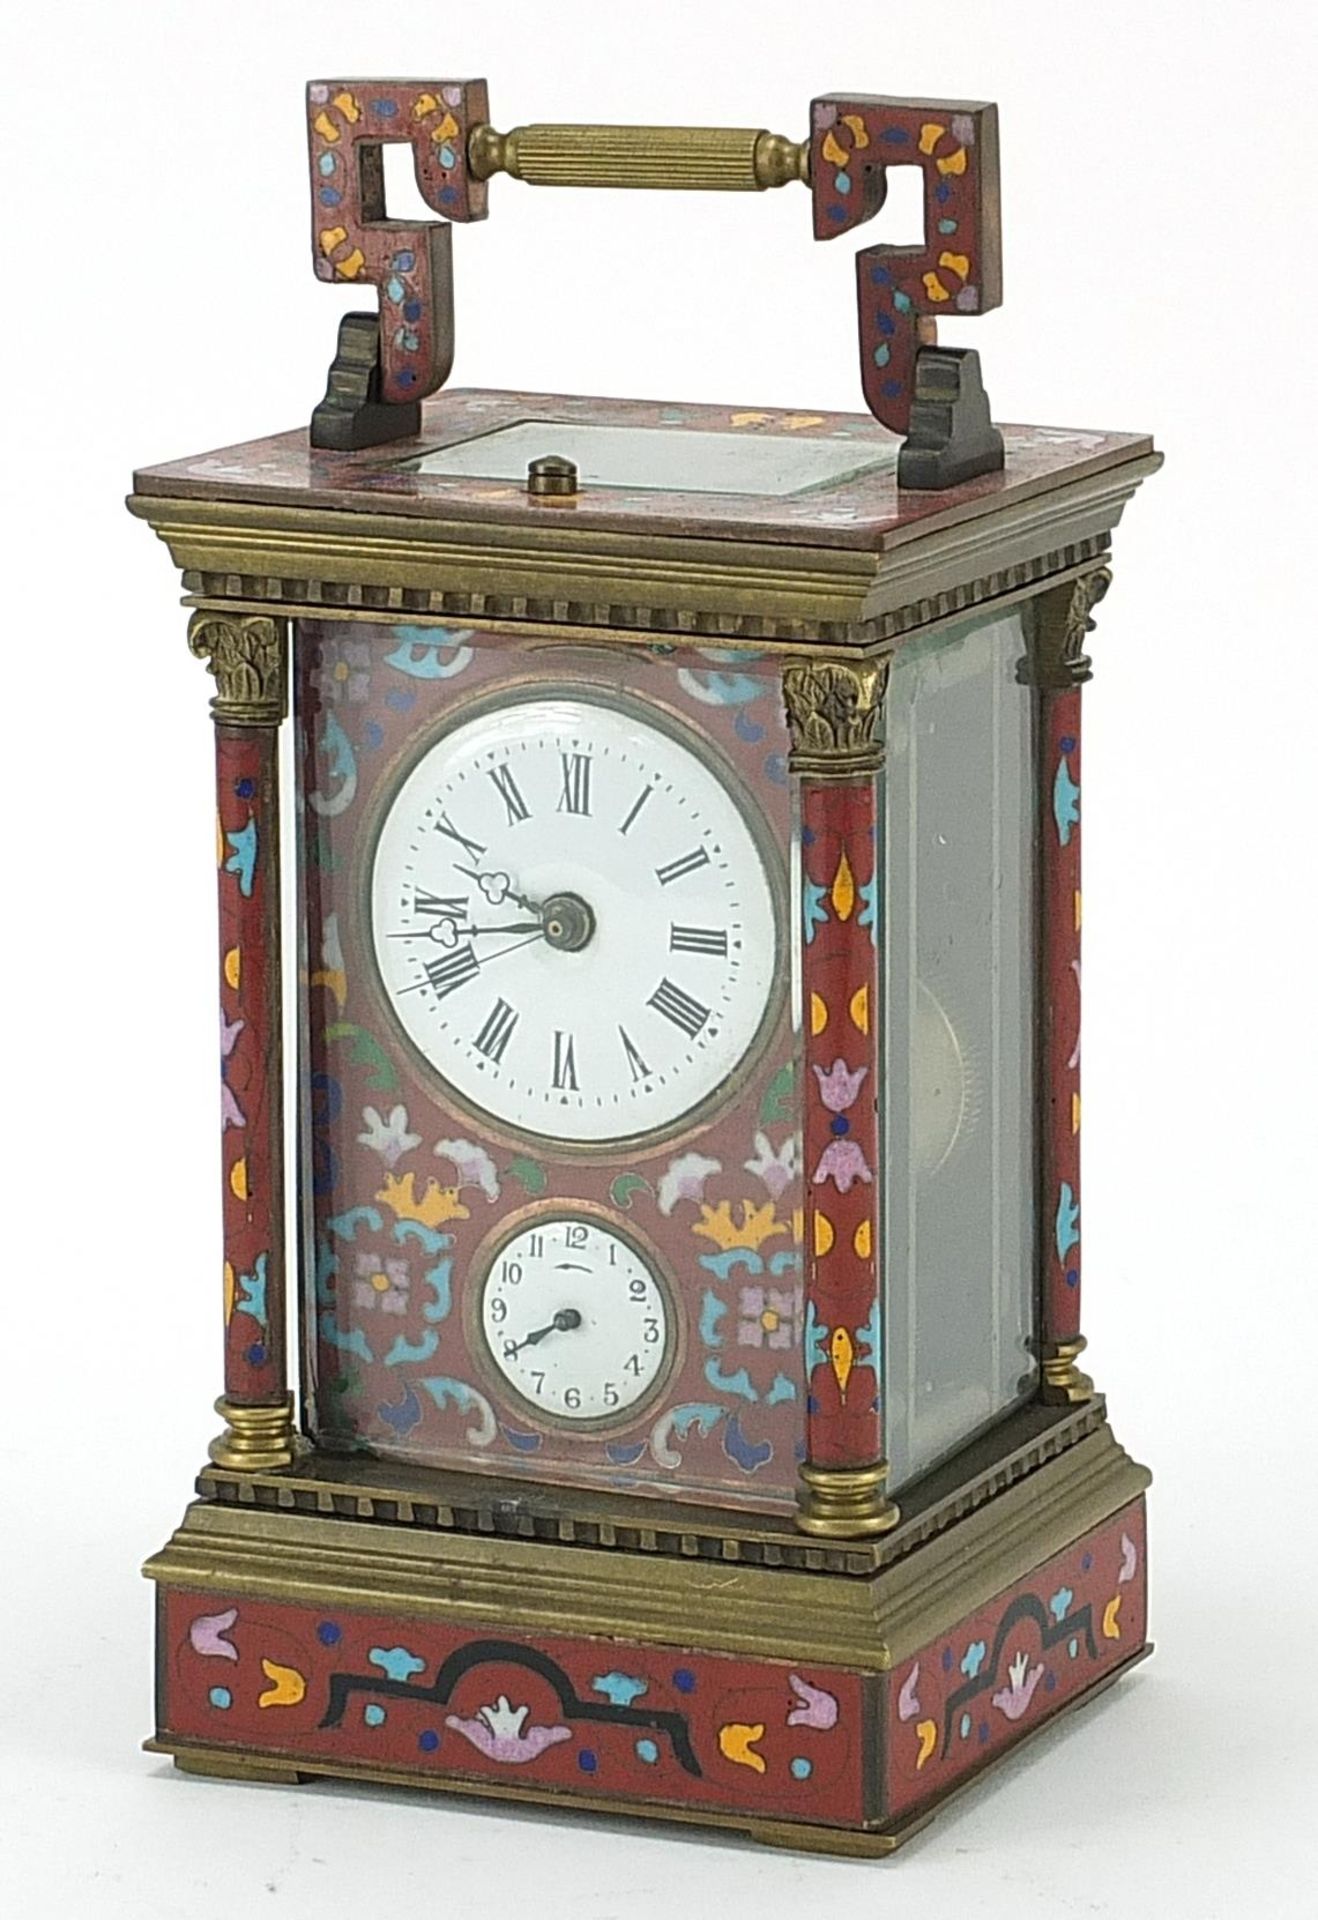 Champleve enamel brass repeating carriage clock with subsidiary dial, 16.5cm high